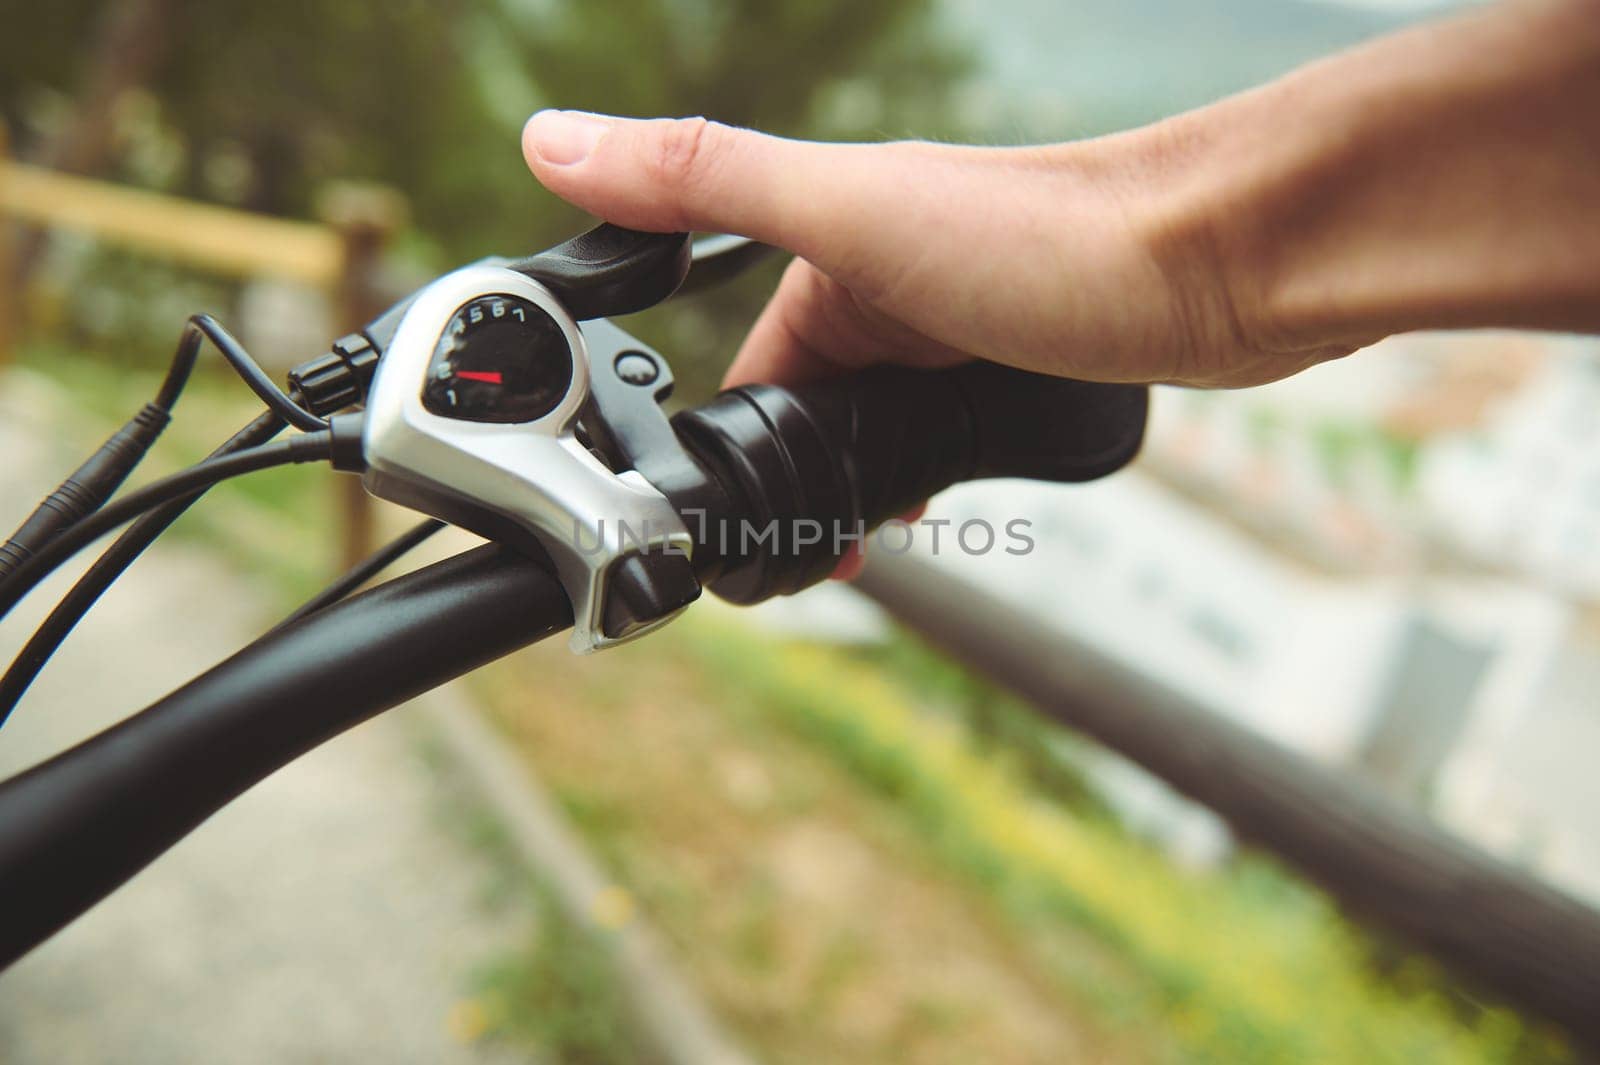 Isolated bicycle brakes in male cyclist's hand. Adjusting bicycle hand brakes while riding cycling on the nature. Close-up view by artgf